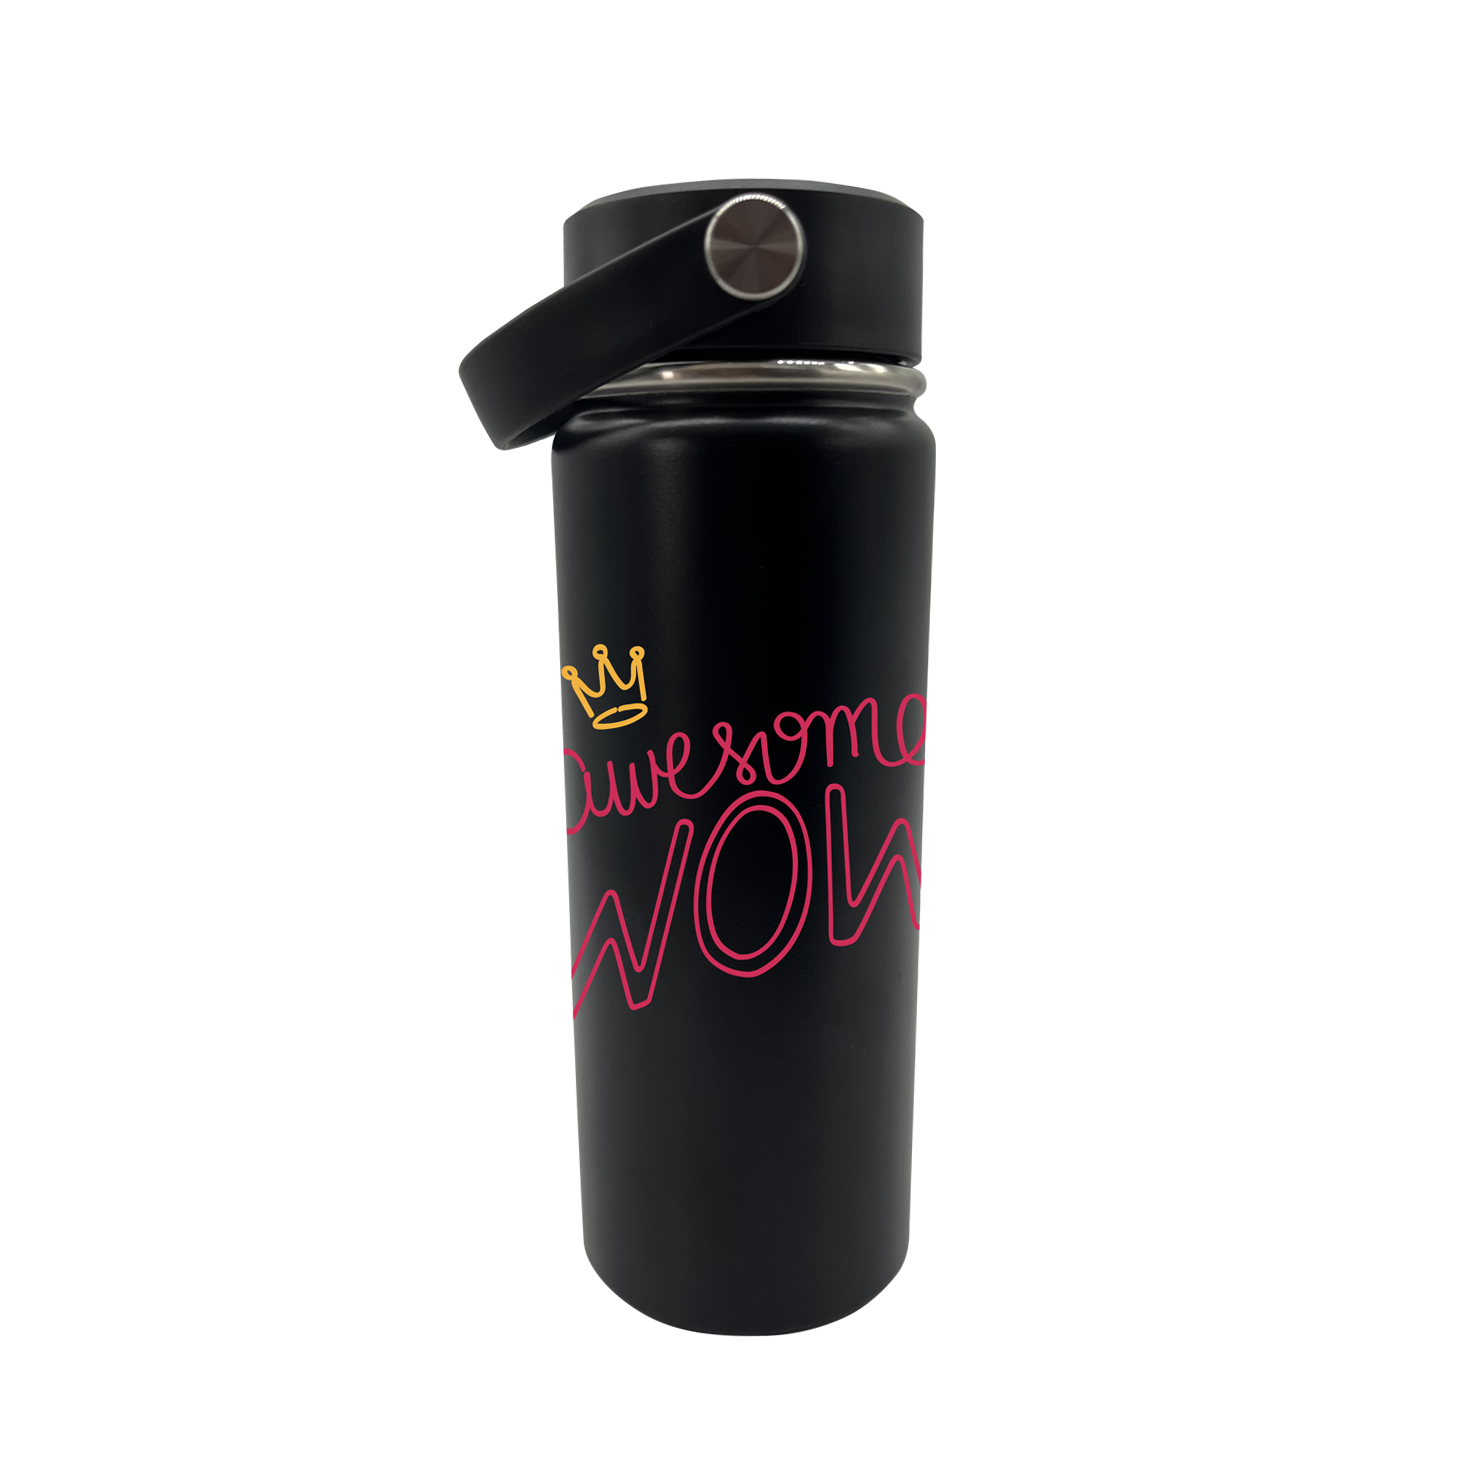 HAMILTON Awesome Wow Water Bottle - Image 2